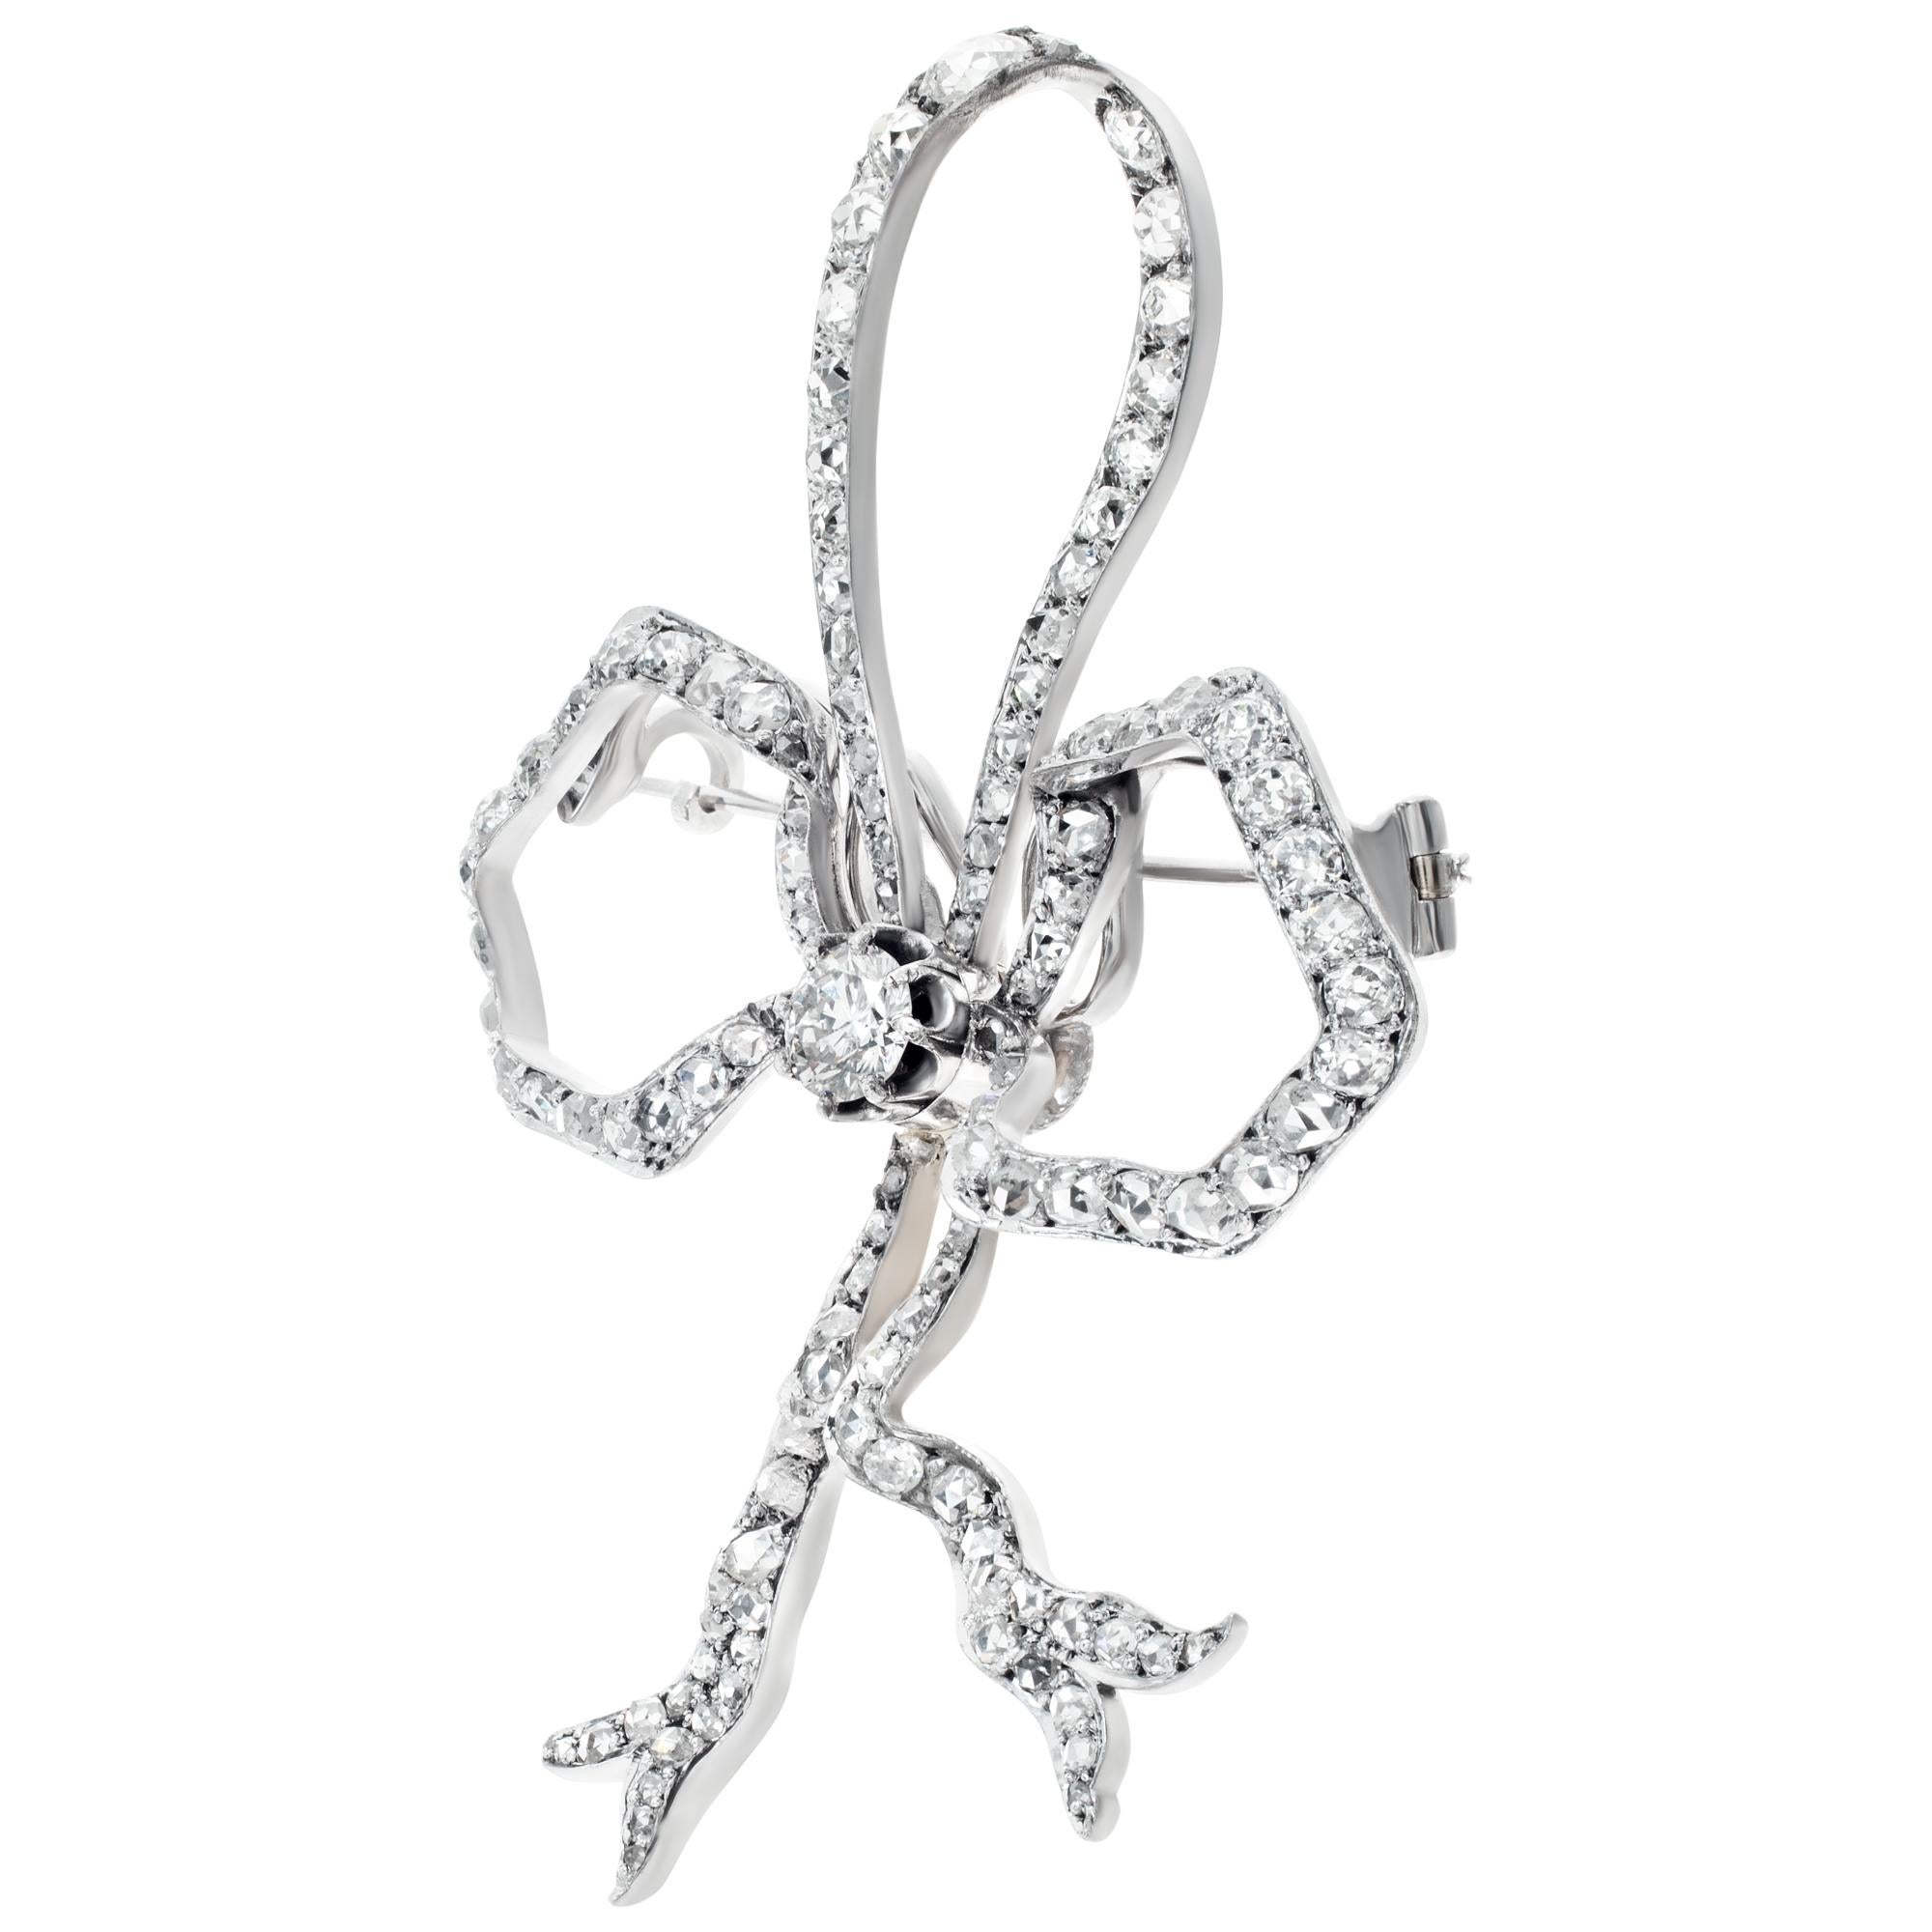 Diamond bow brooch in 18k white gold with a 1 carat center rose cut diamond and 3 carats of accent diamonds. Measurements: 1.5